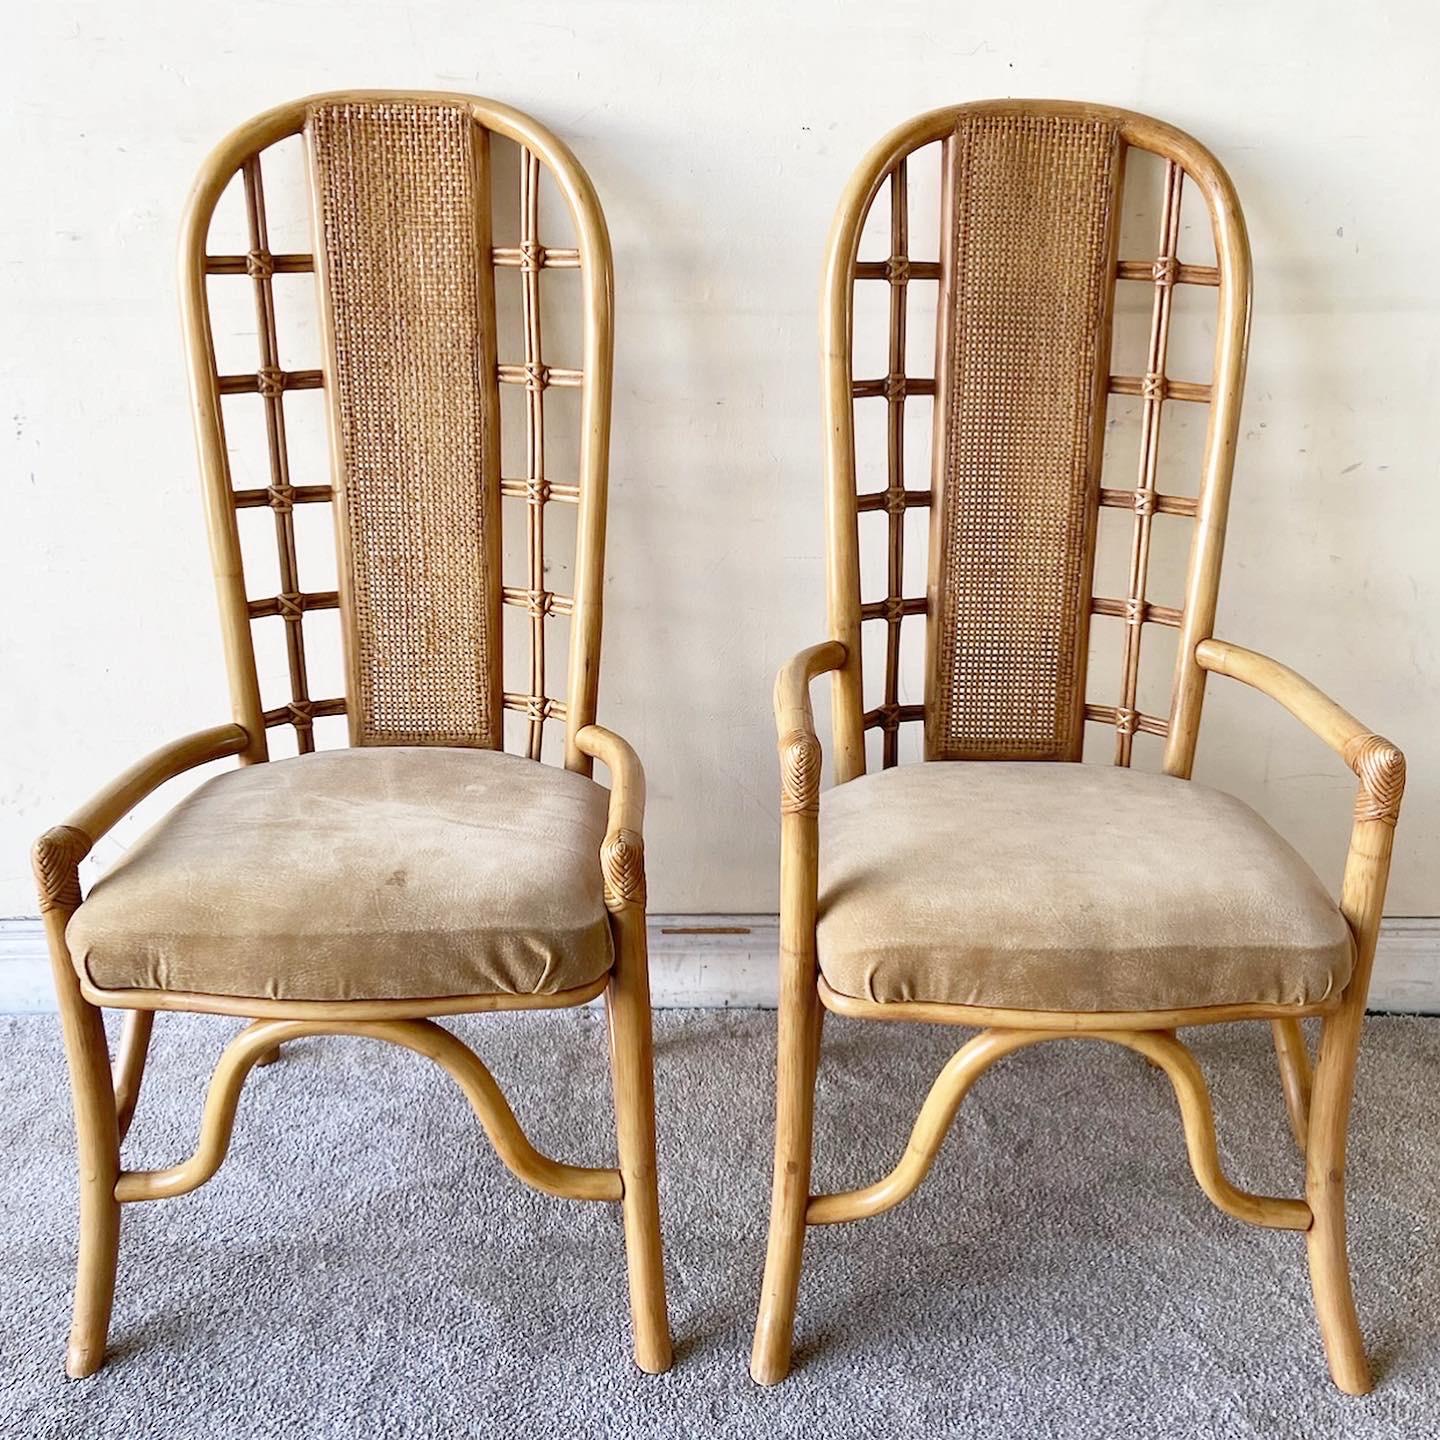 Exceptional set of 4 vintage boho chic dining chairs. Each feature a bamboo rattan frame with a cane back rest and brown leather seat.